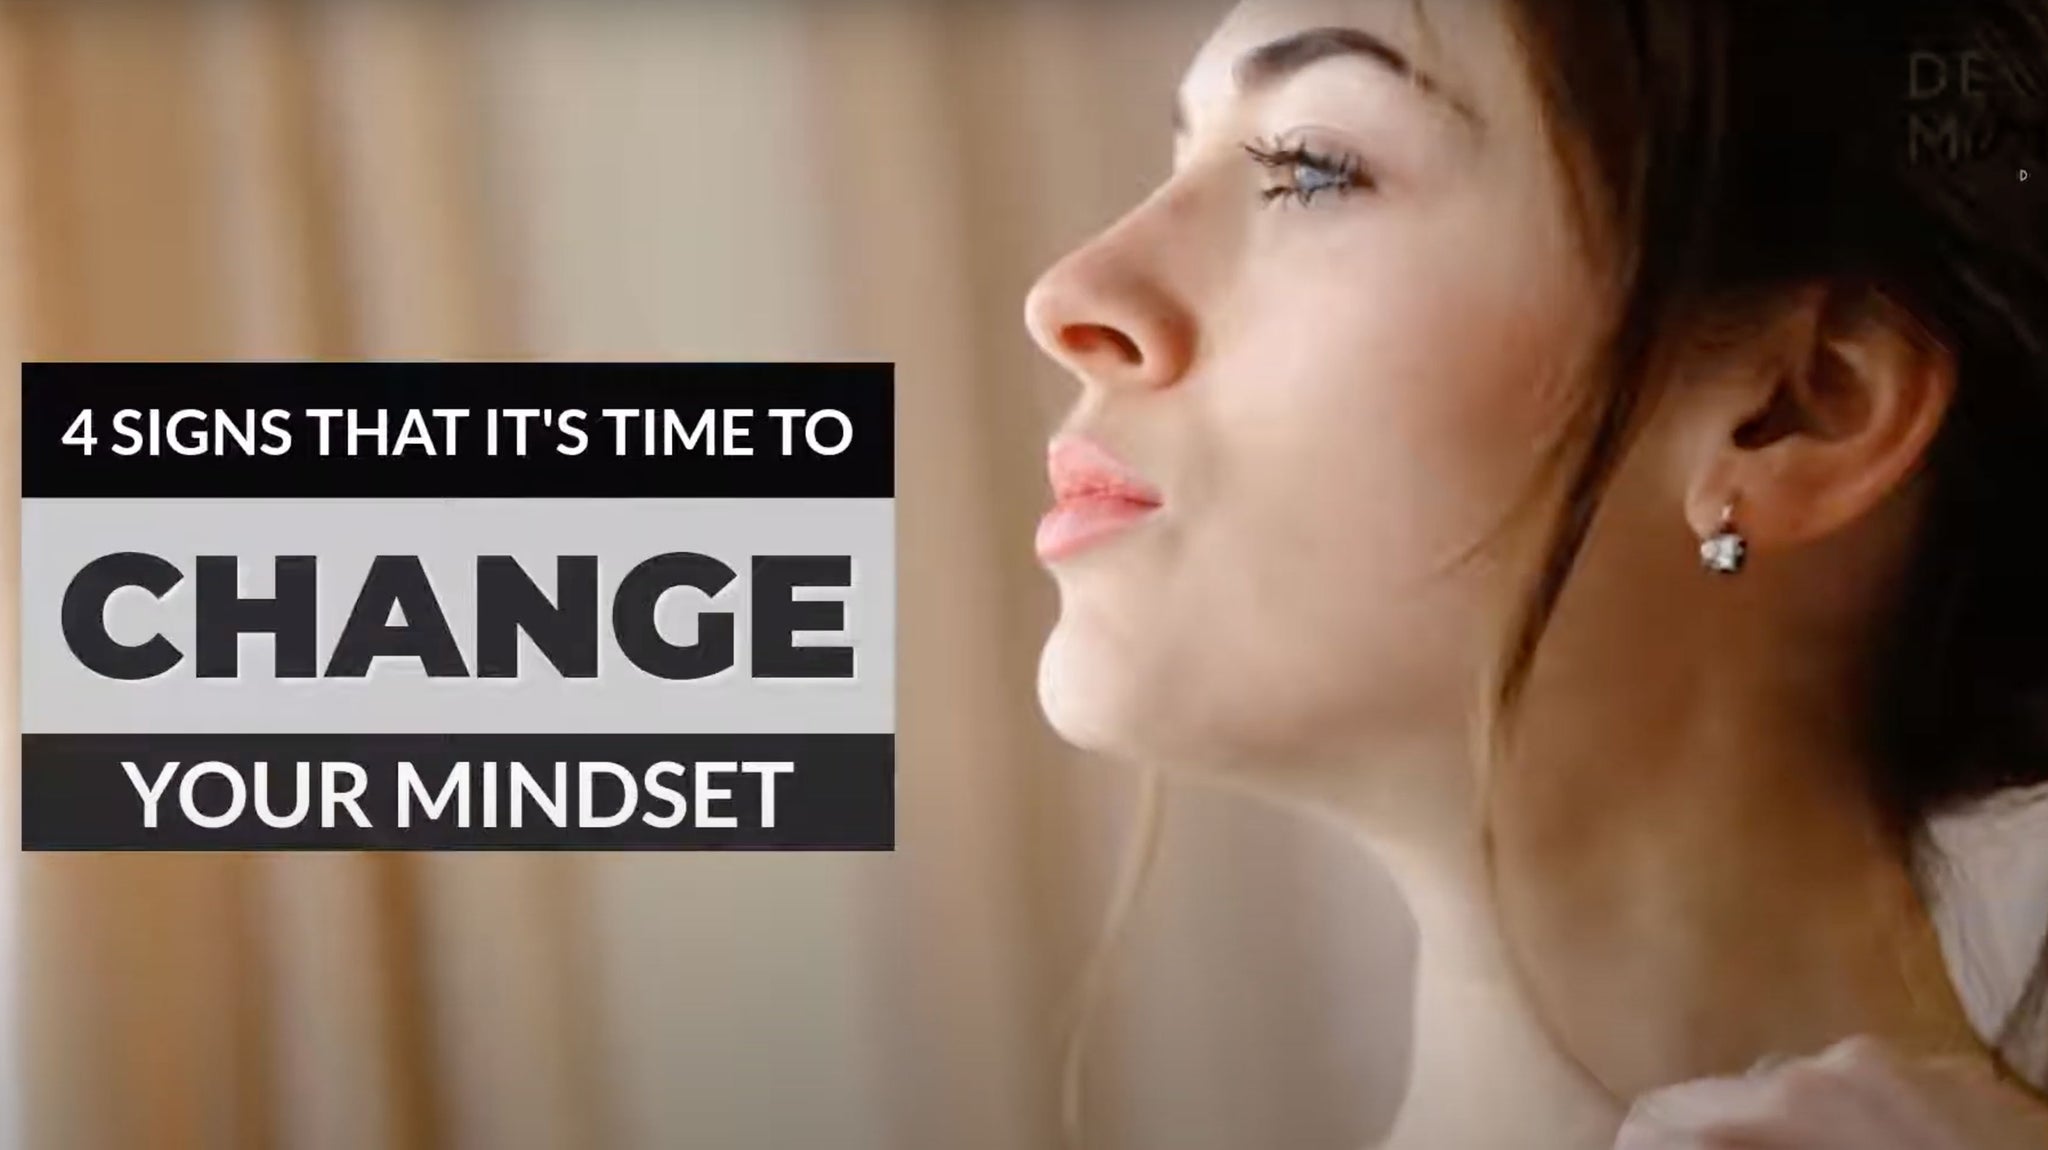 4 Warnings That It’s Time to Change Your Mindset